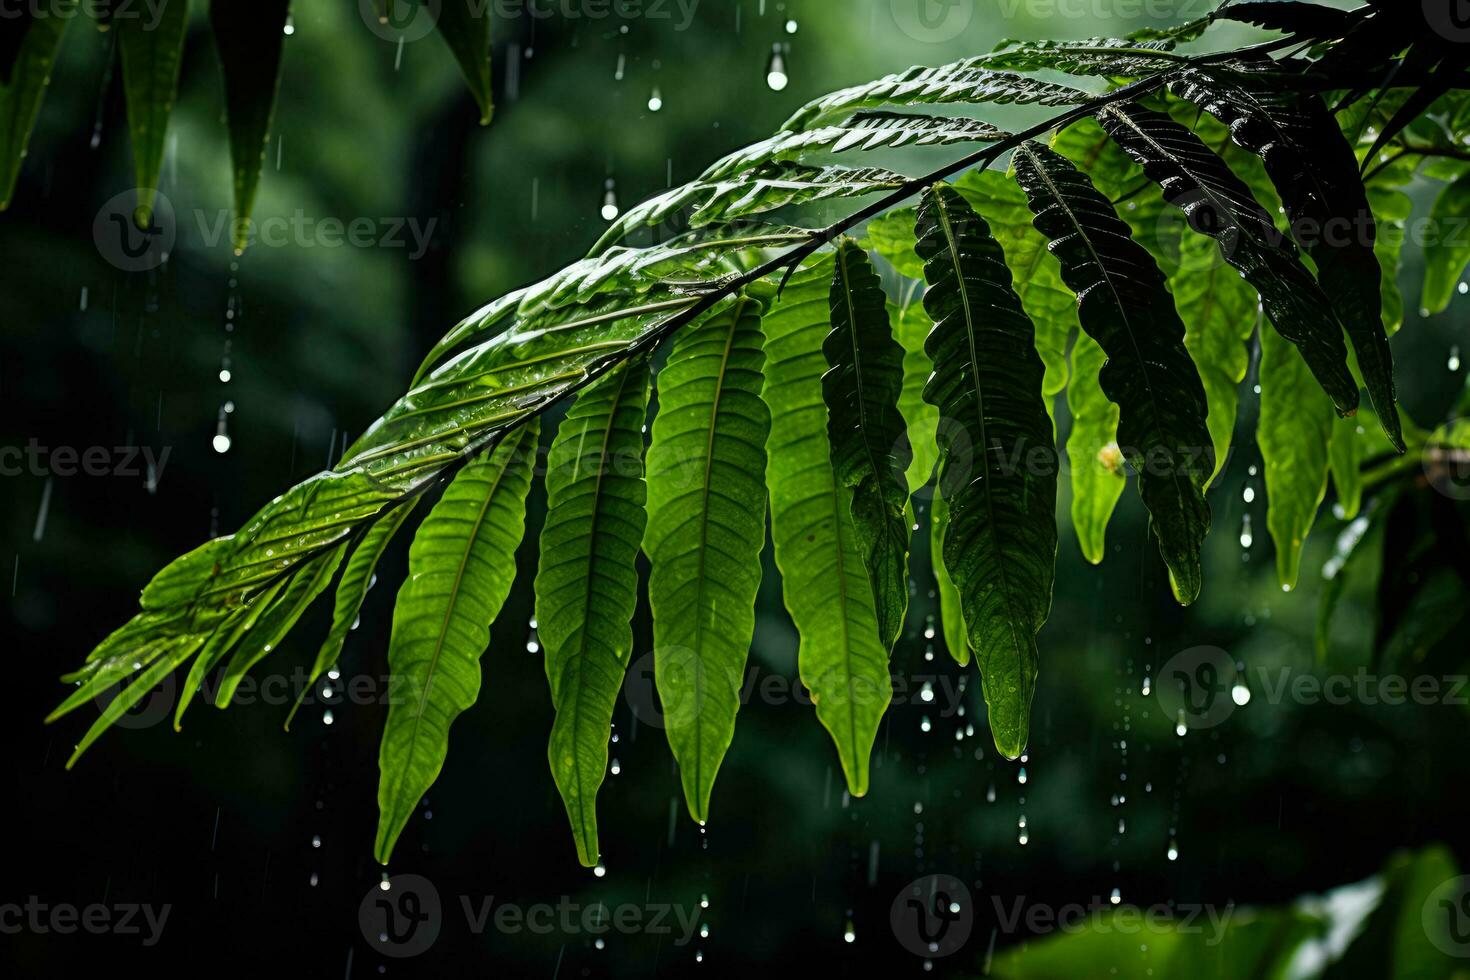 Raindrops clinging to foliage vividly showcasing the aftermath of a tropical storm photo